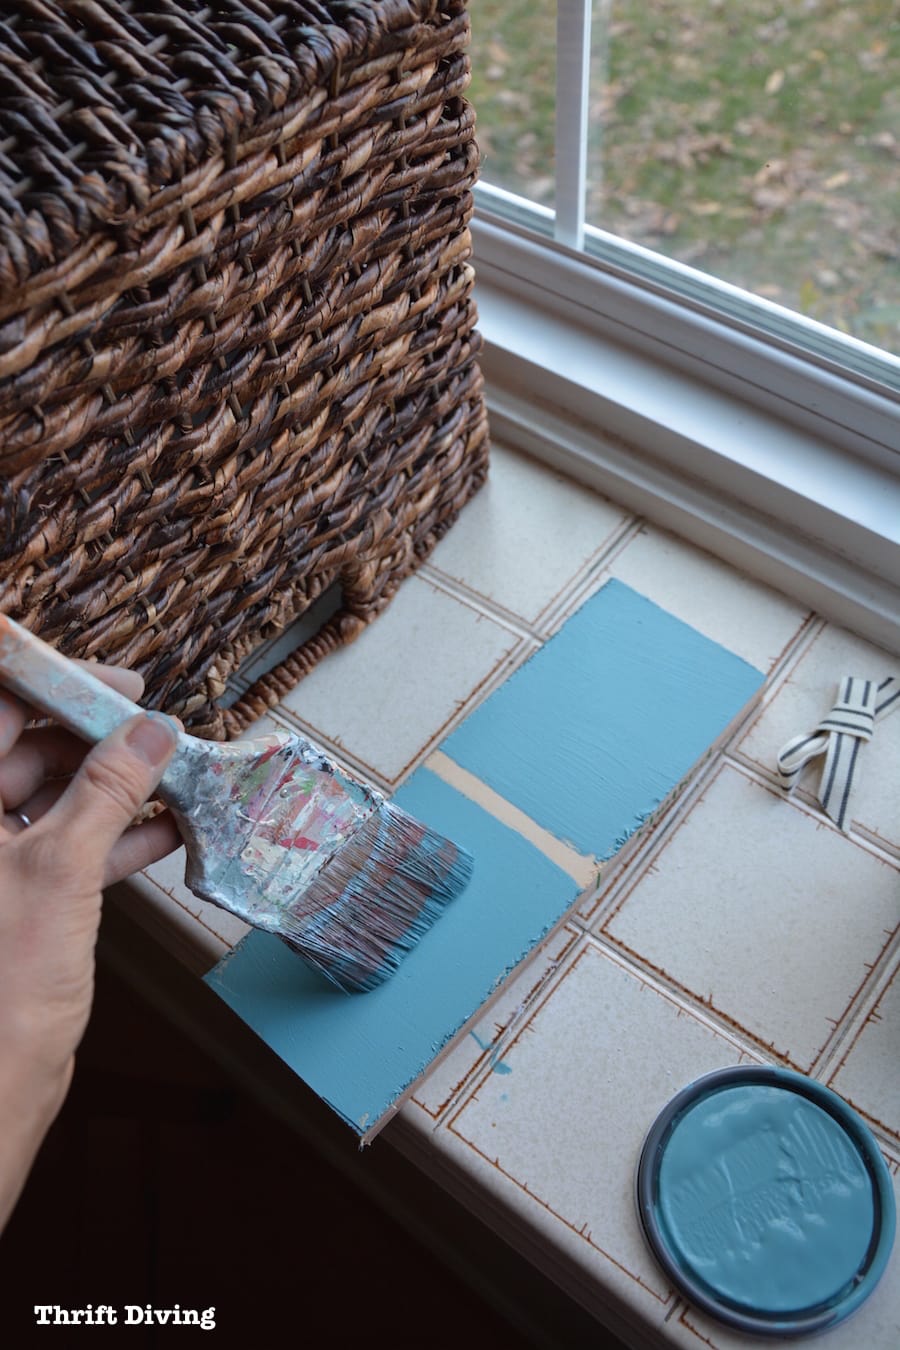 Should you make your own DIY chalk paint - Doing a test board